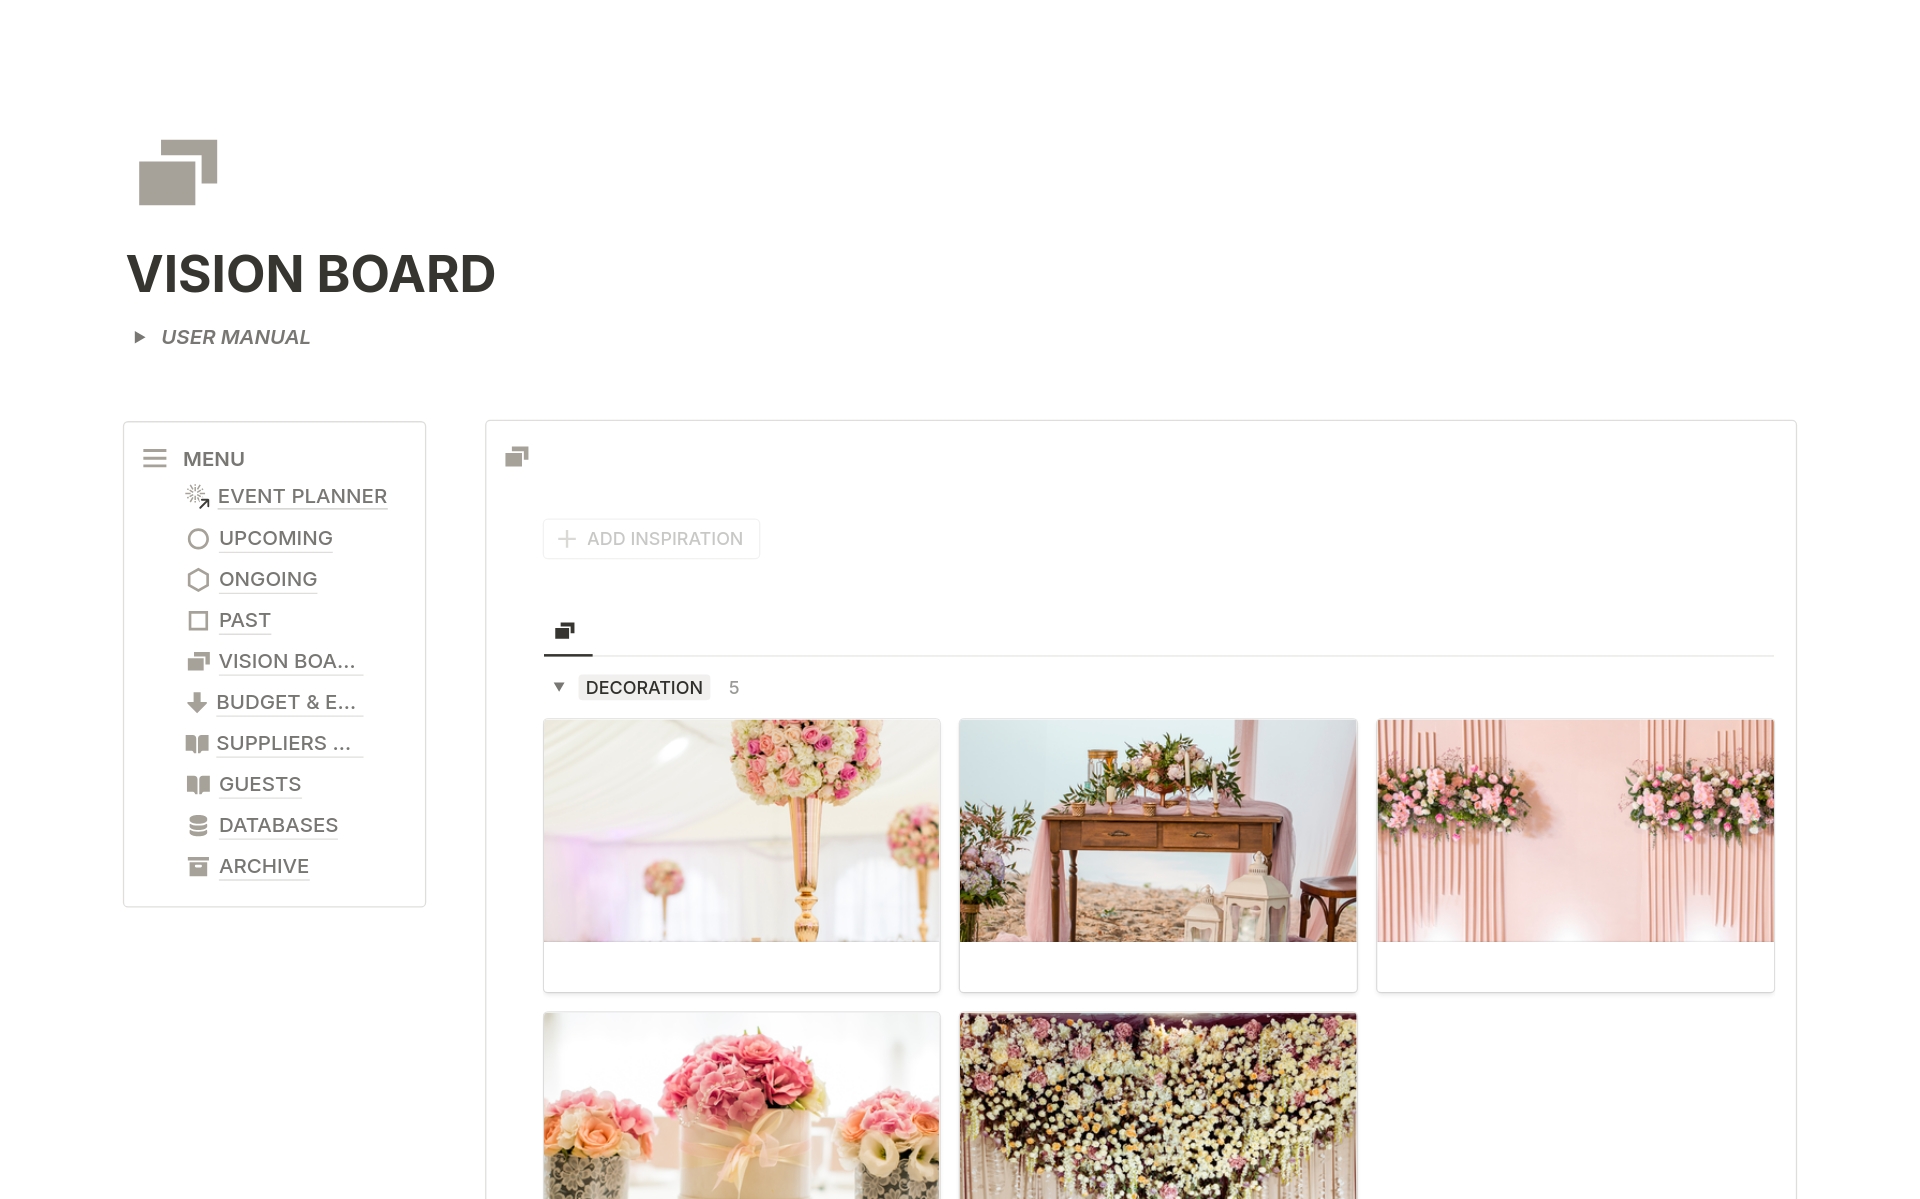 The Event Planner streamlines event organization with sections for upcoming, ongoing, and past events. Features include pages for guest details, venues, budget tracking, and a vision board. It also offers specific pages for each event, covering sites, schedules, invitations,